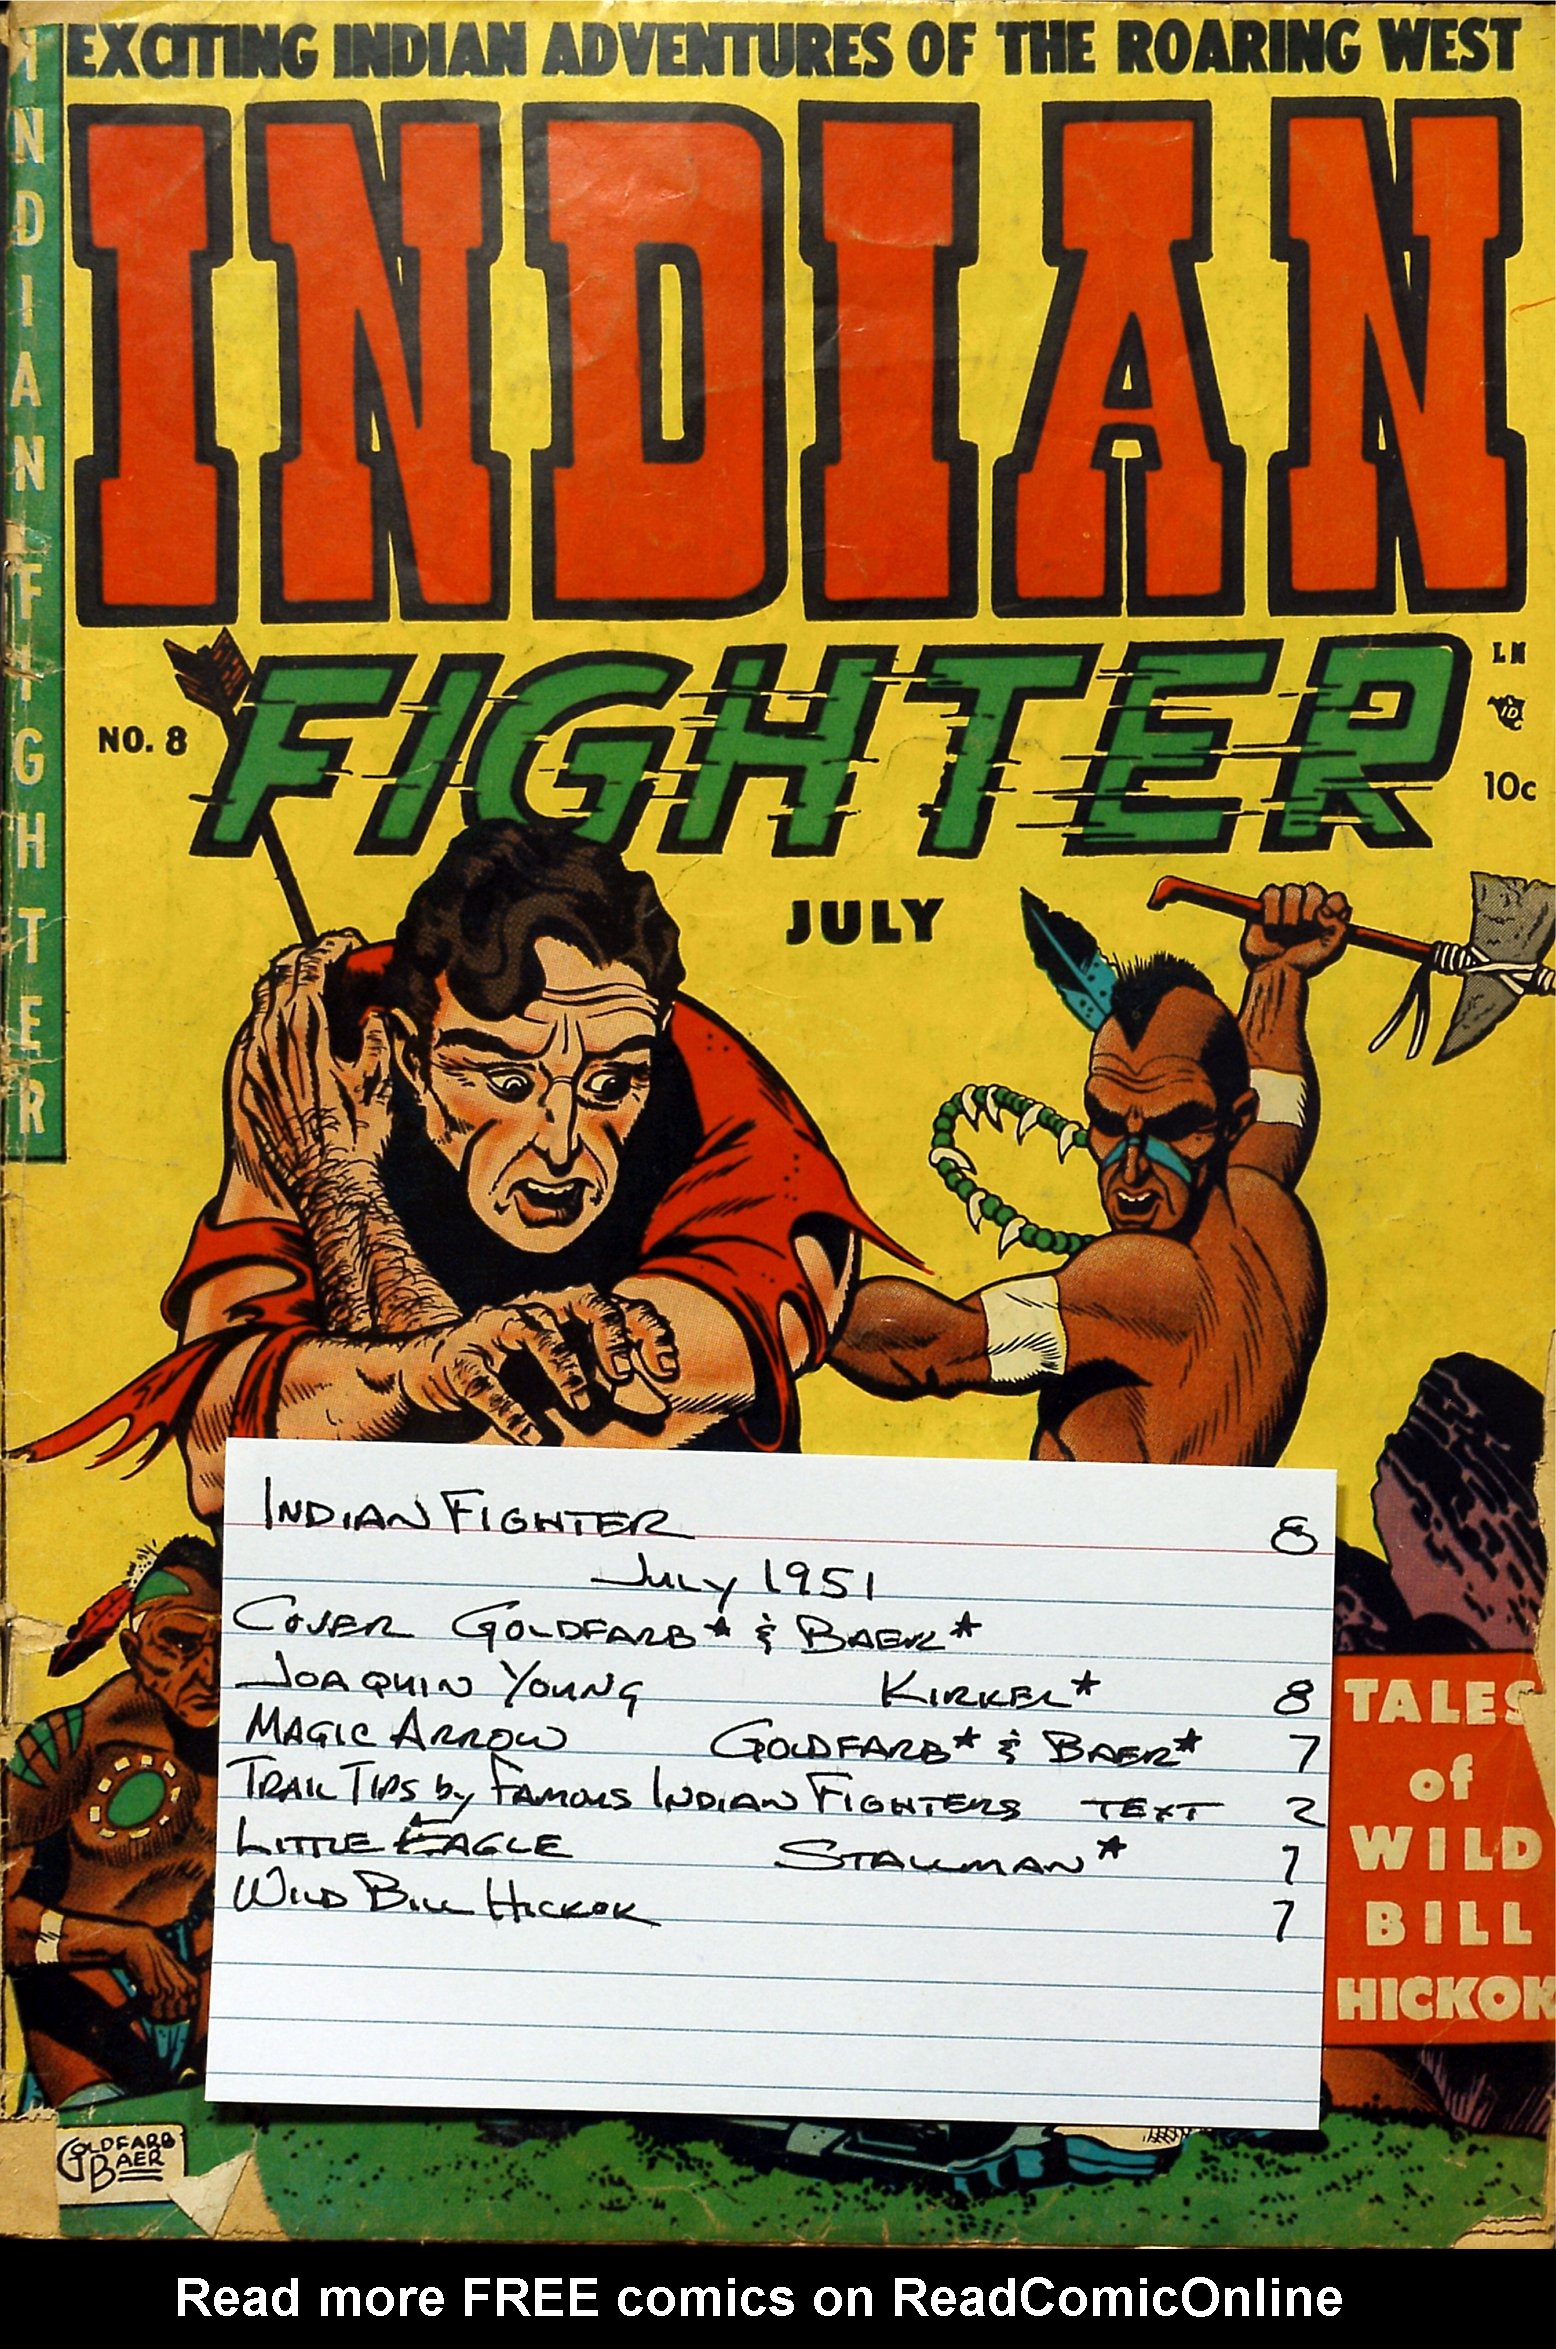 Read online Indian Fighter comic -  Issue #8 - 37